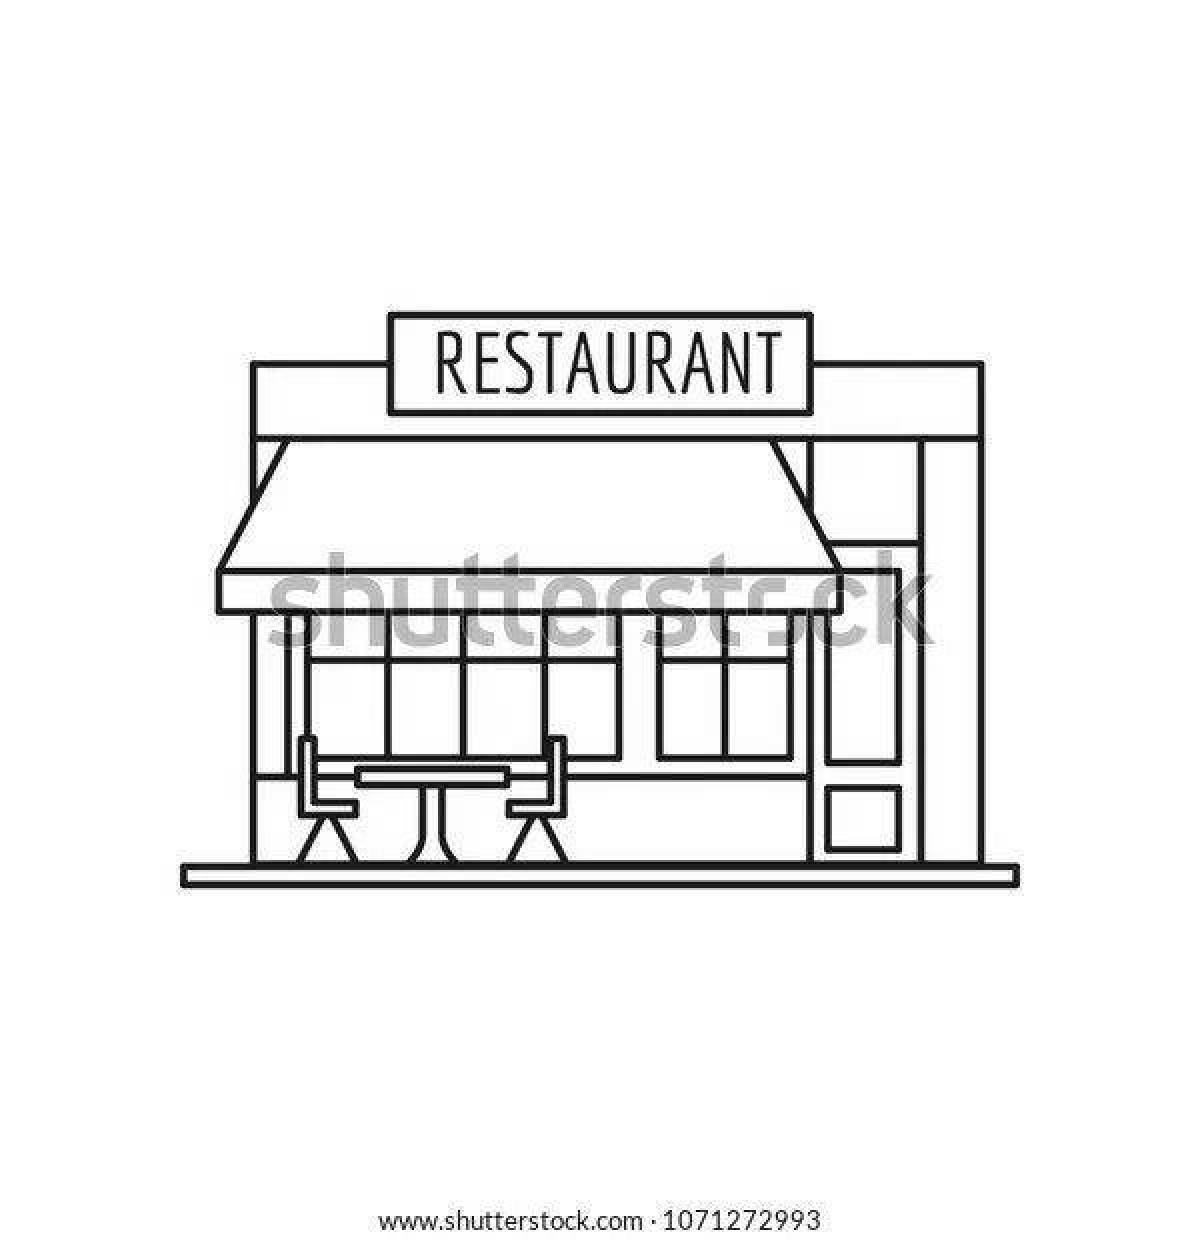 Coloring page stimulating restaurant